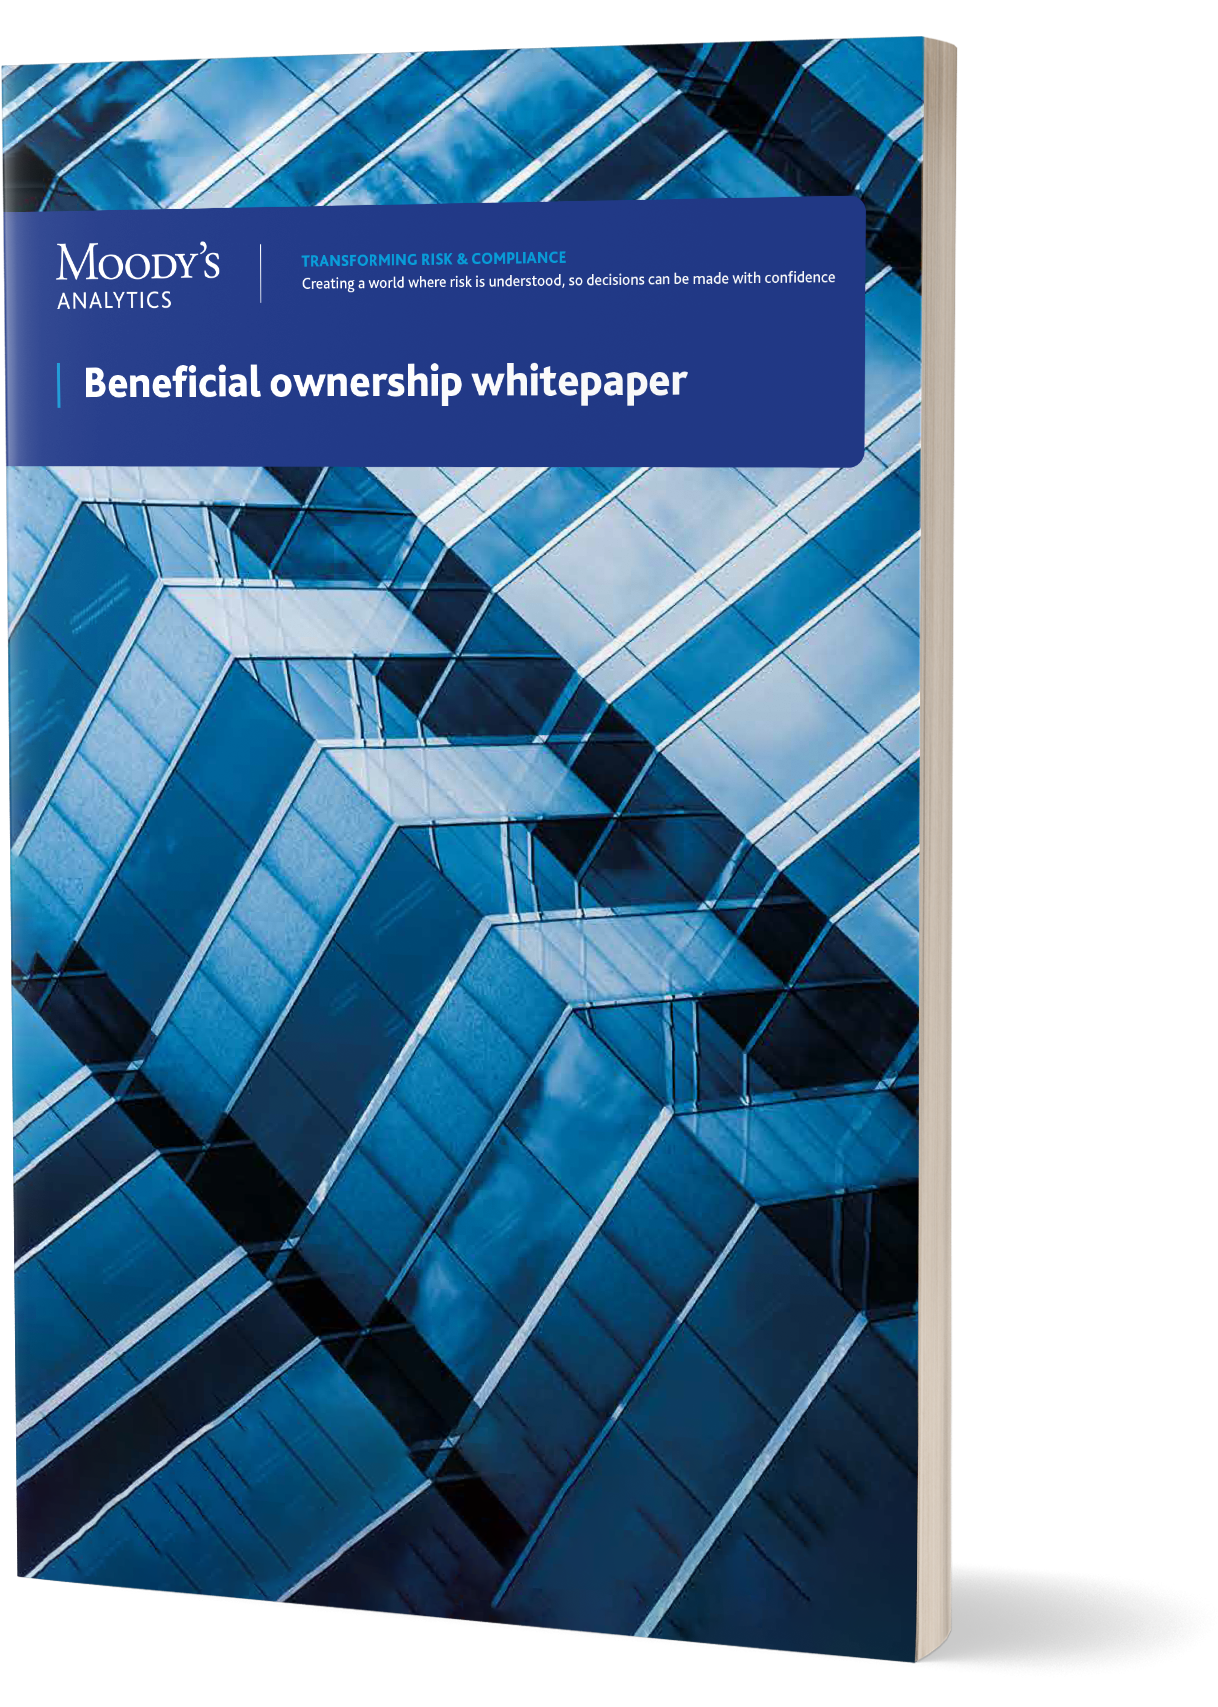 Beneficial ownership whitepaper